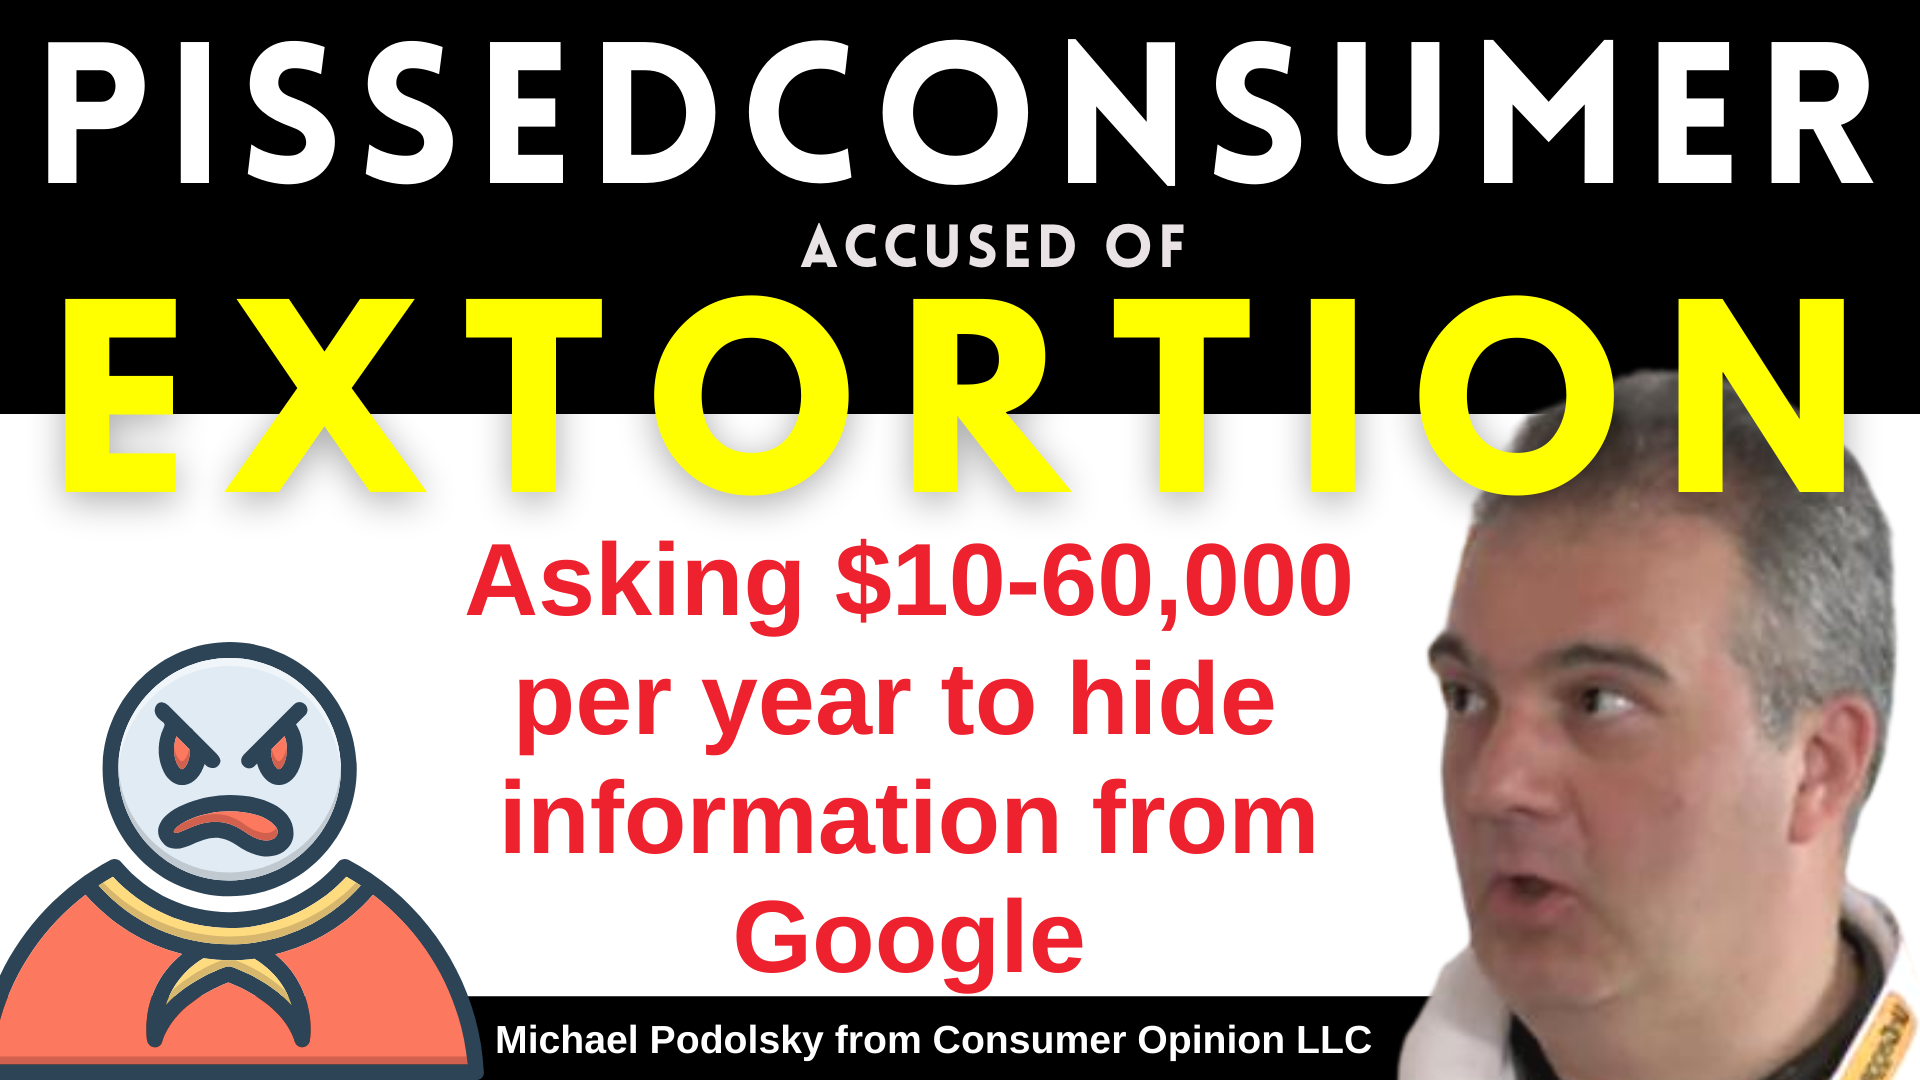 PISSEDCONSUMER Asking $10-60,000 per year to hide information from Google accused of EXTORTION of small businesses by Michael Podolsky from consumer Opinion